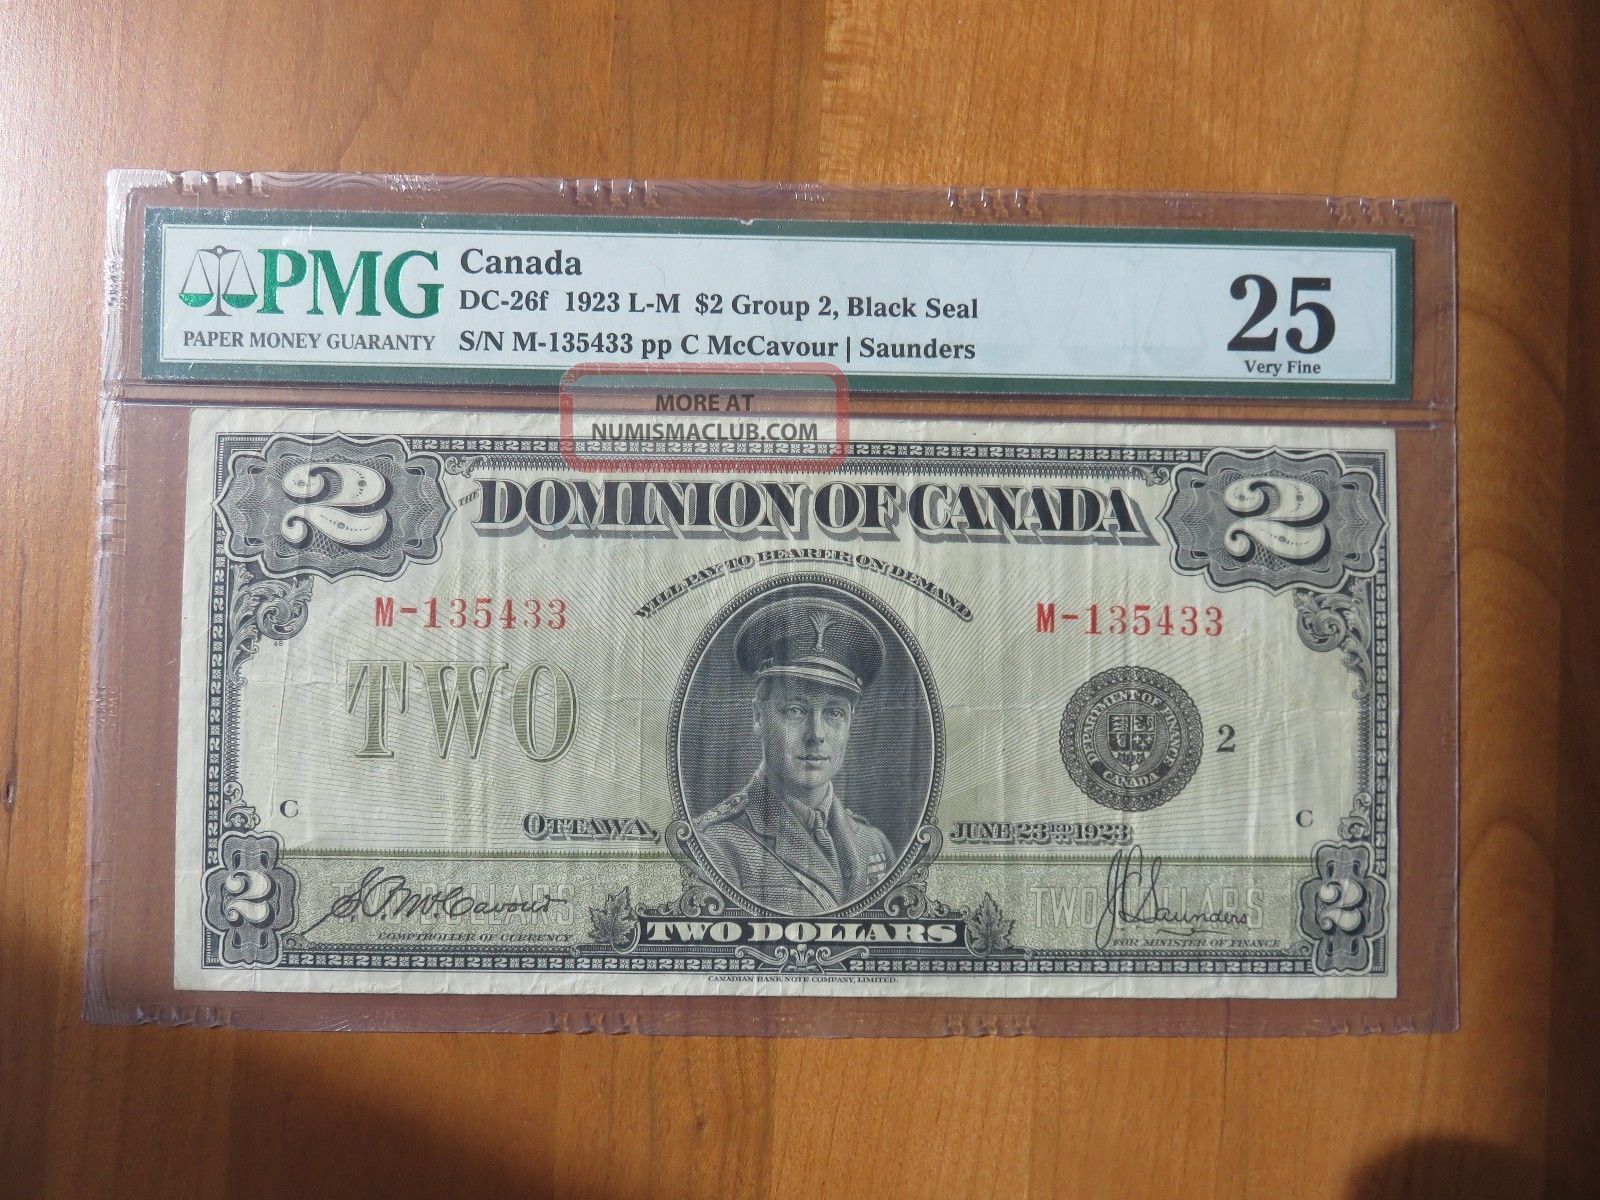 1923 Dominion Of Canada $2 Pmg 25 Large Banknote Dc - 26f Black Seal